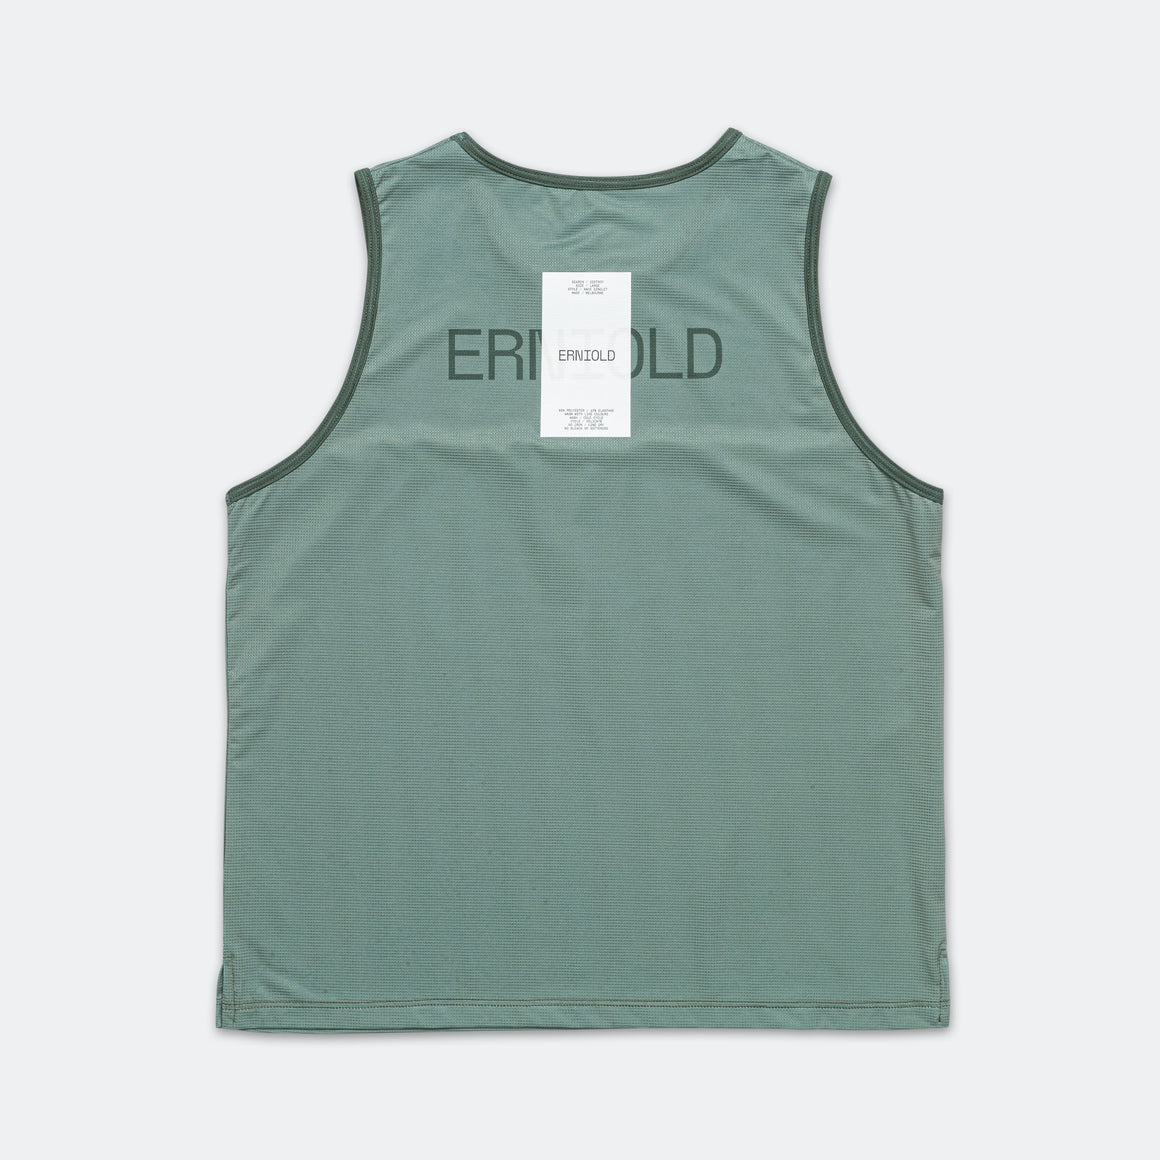 Erniold - Womens Race Singlet - Dark Moss - Up There Athletics